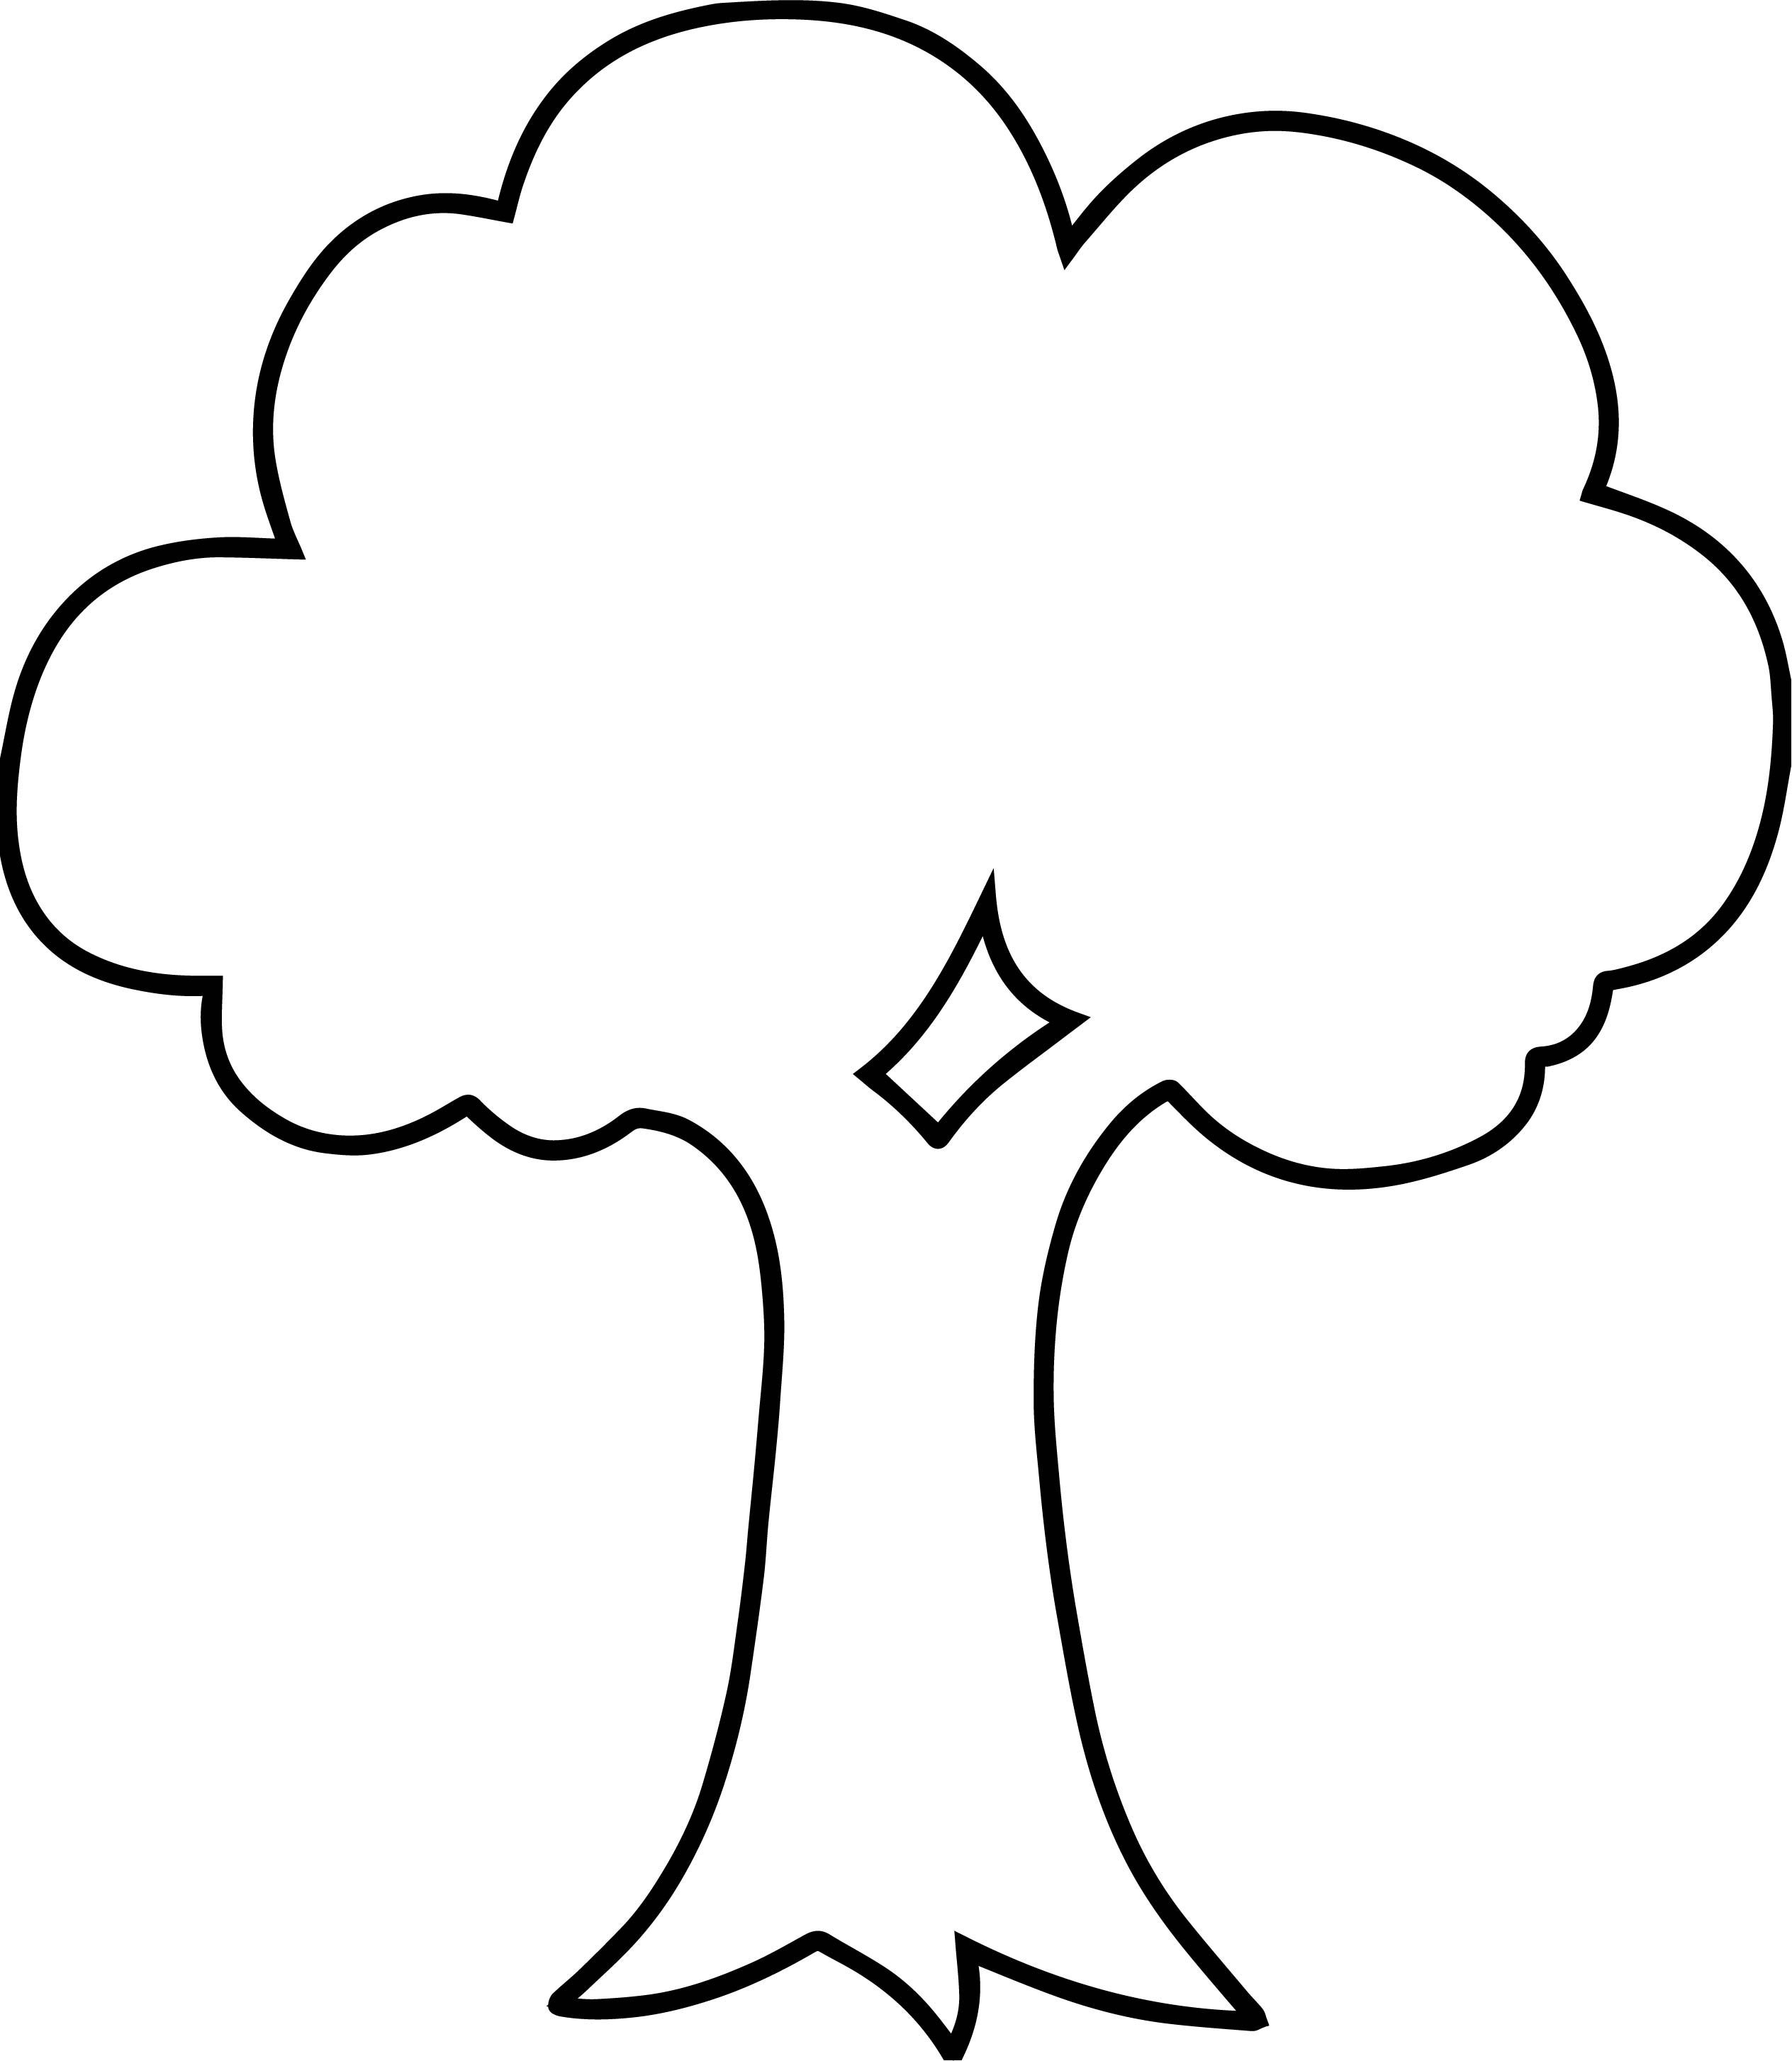 Empty apple tree coloring page